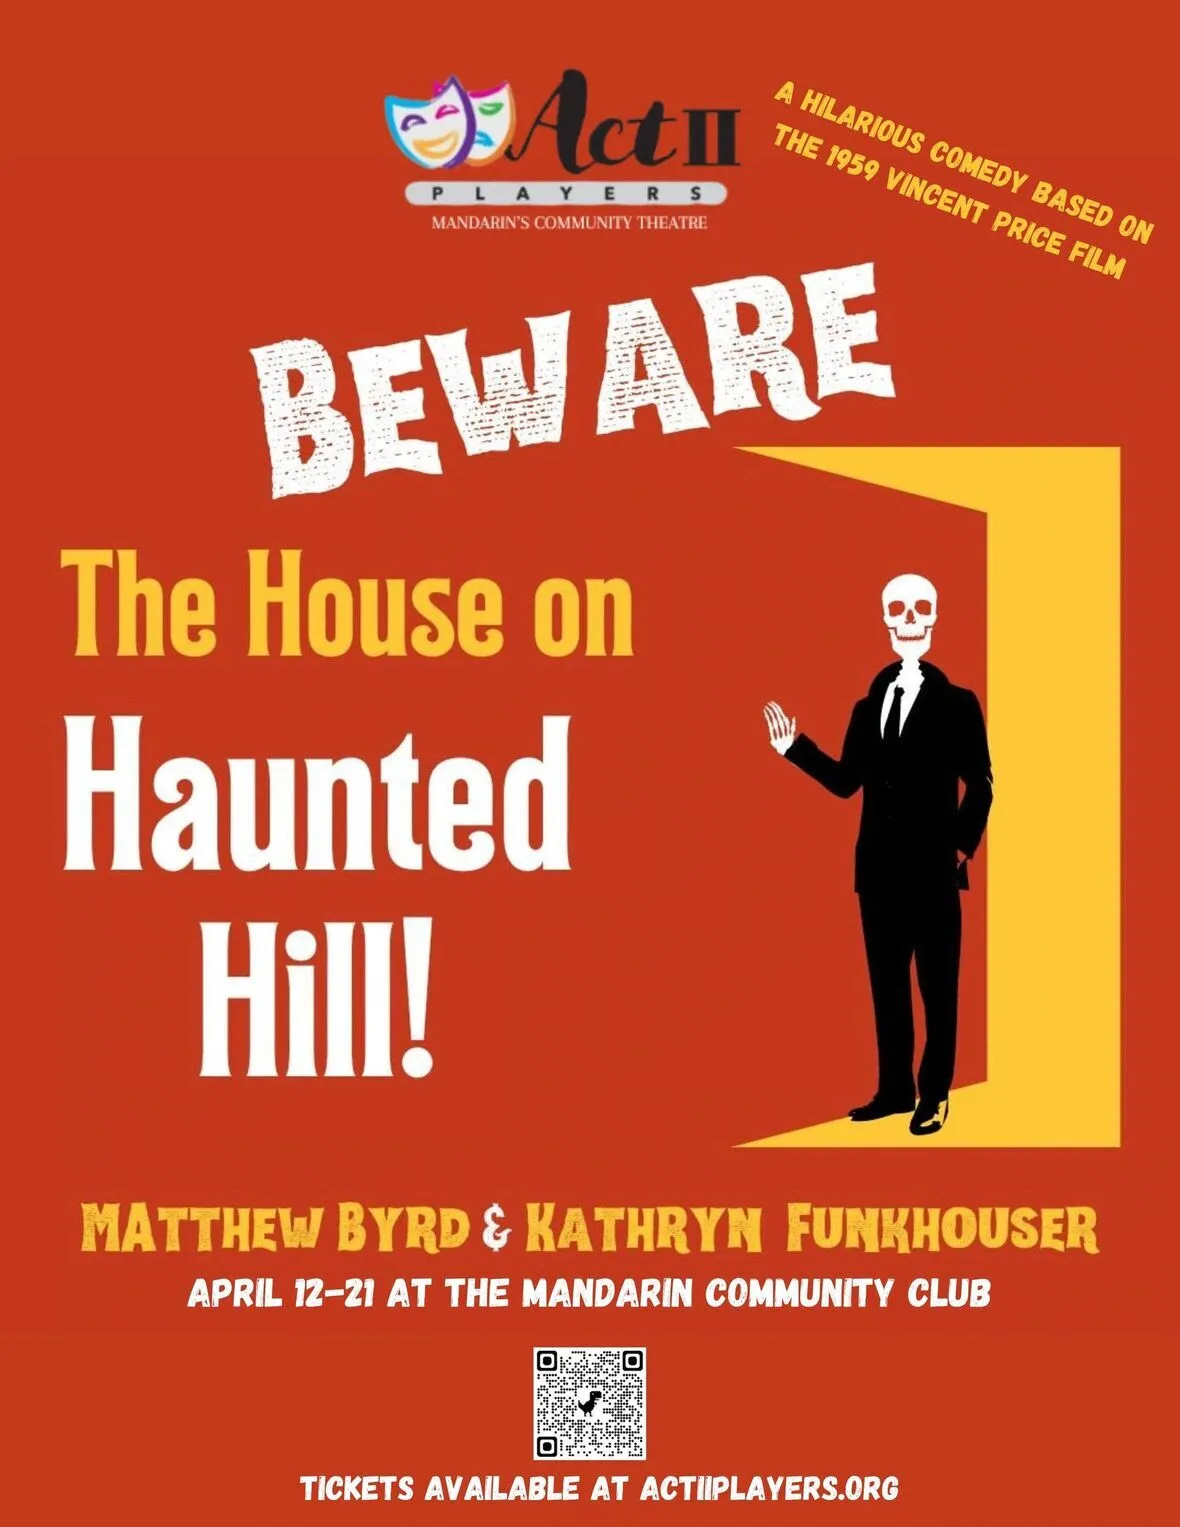 Beware the House on Haunted Hill!